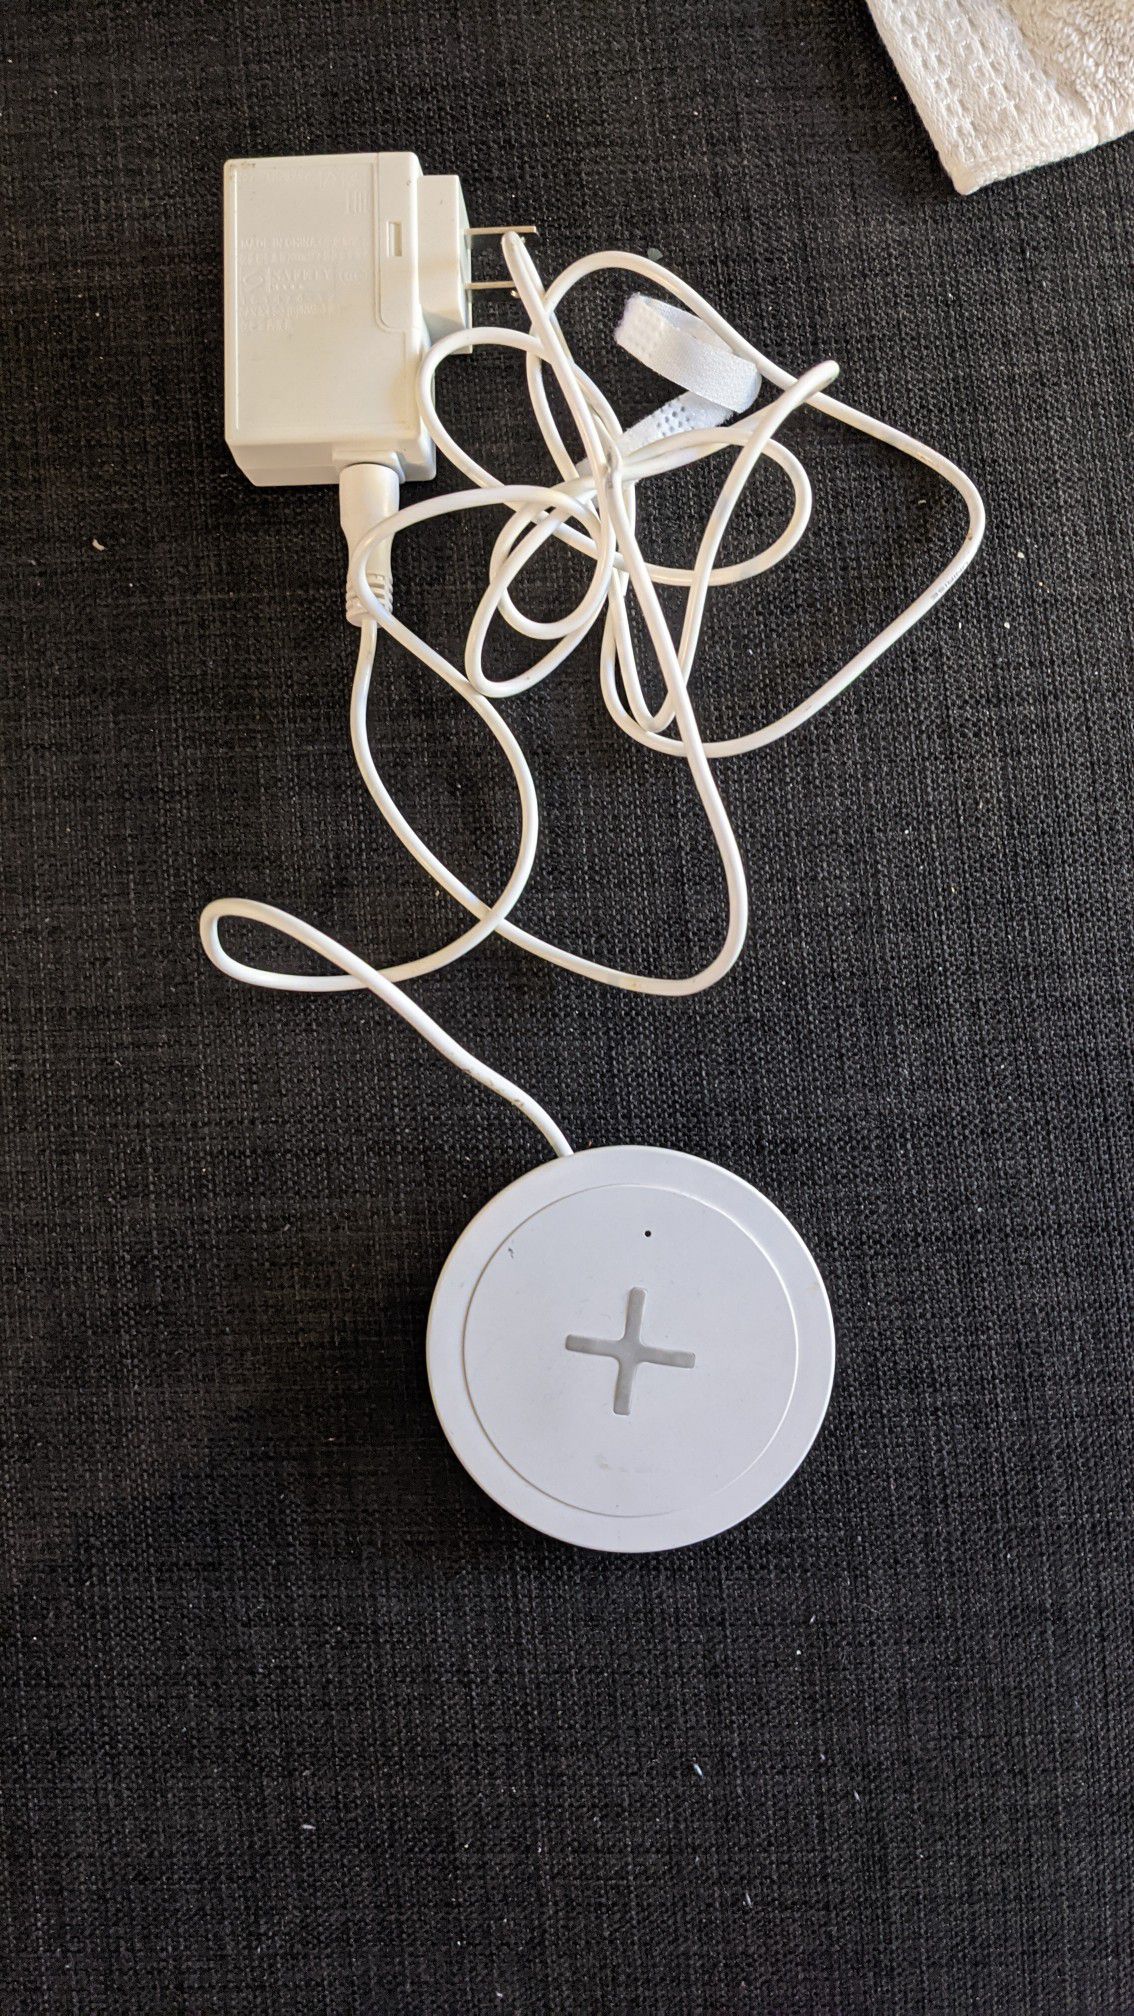 Ikea wireless charger